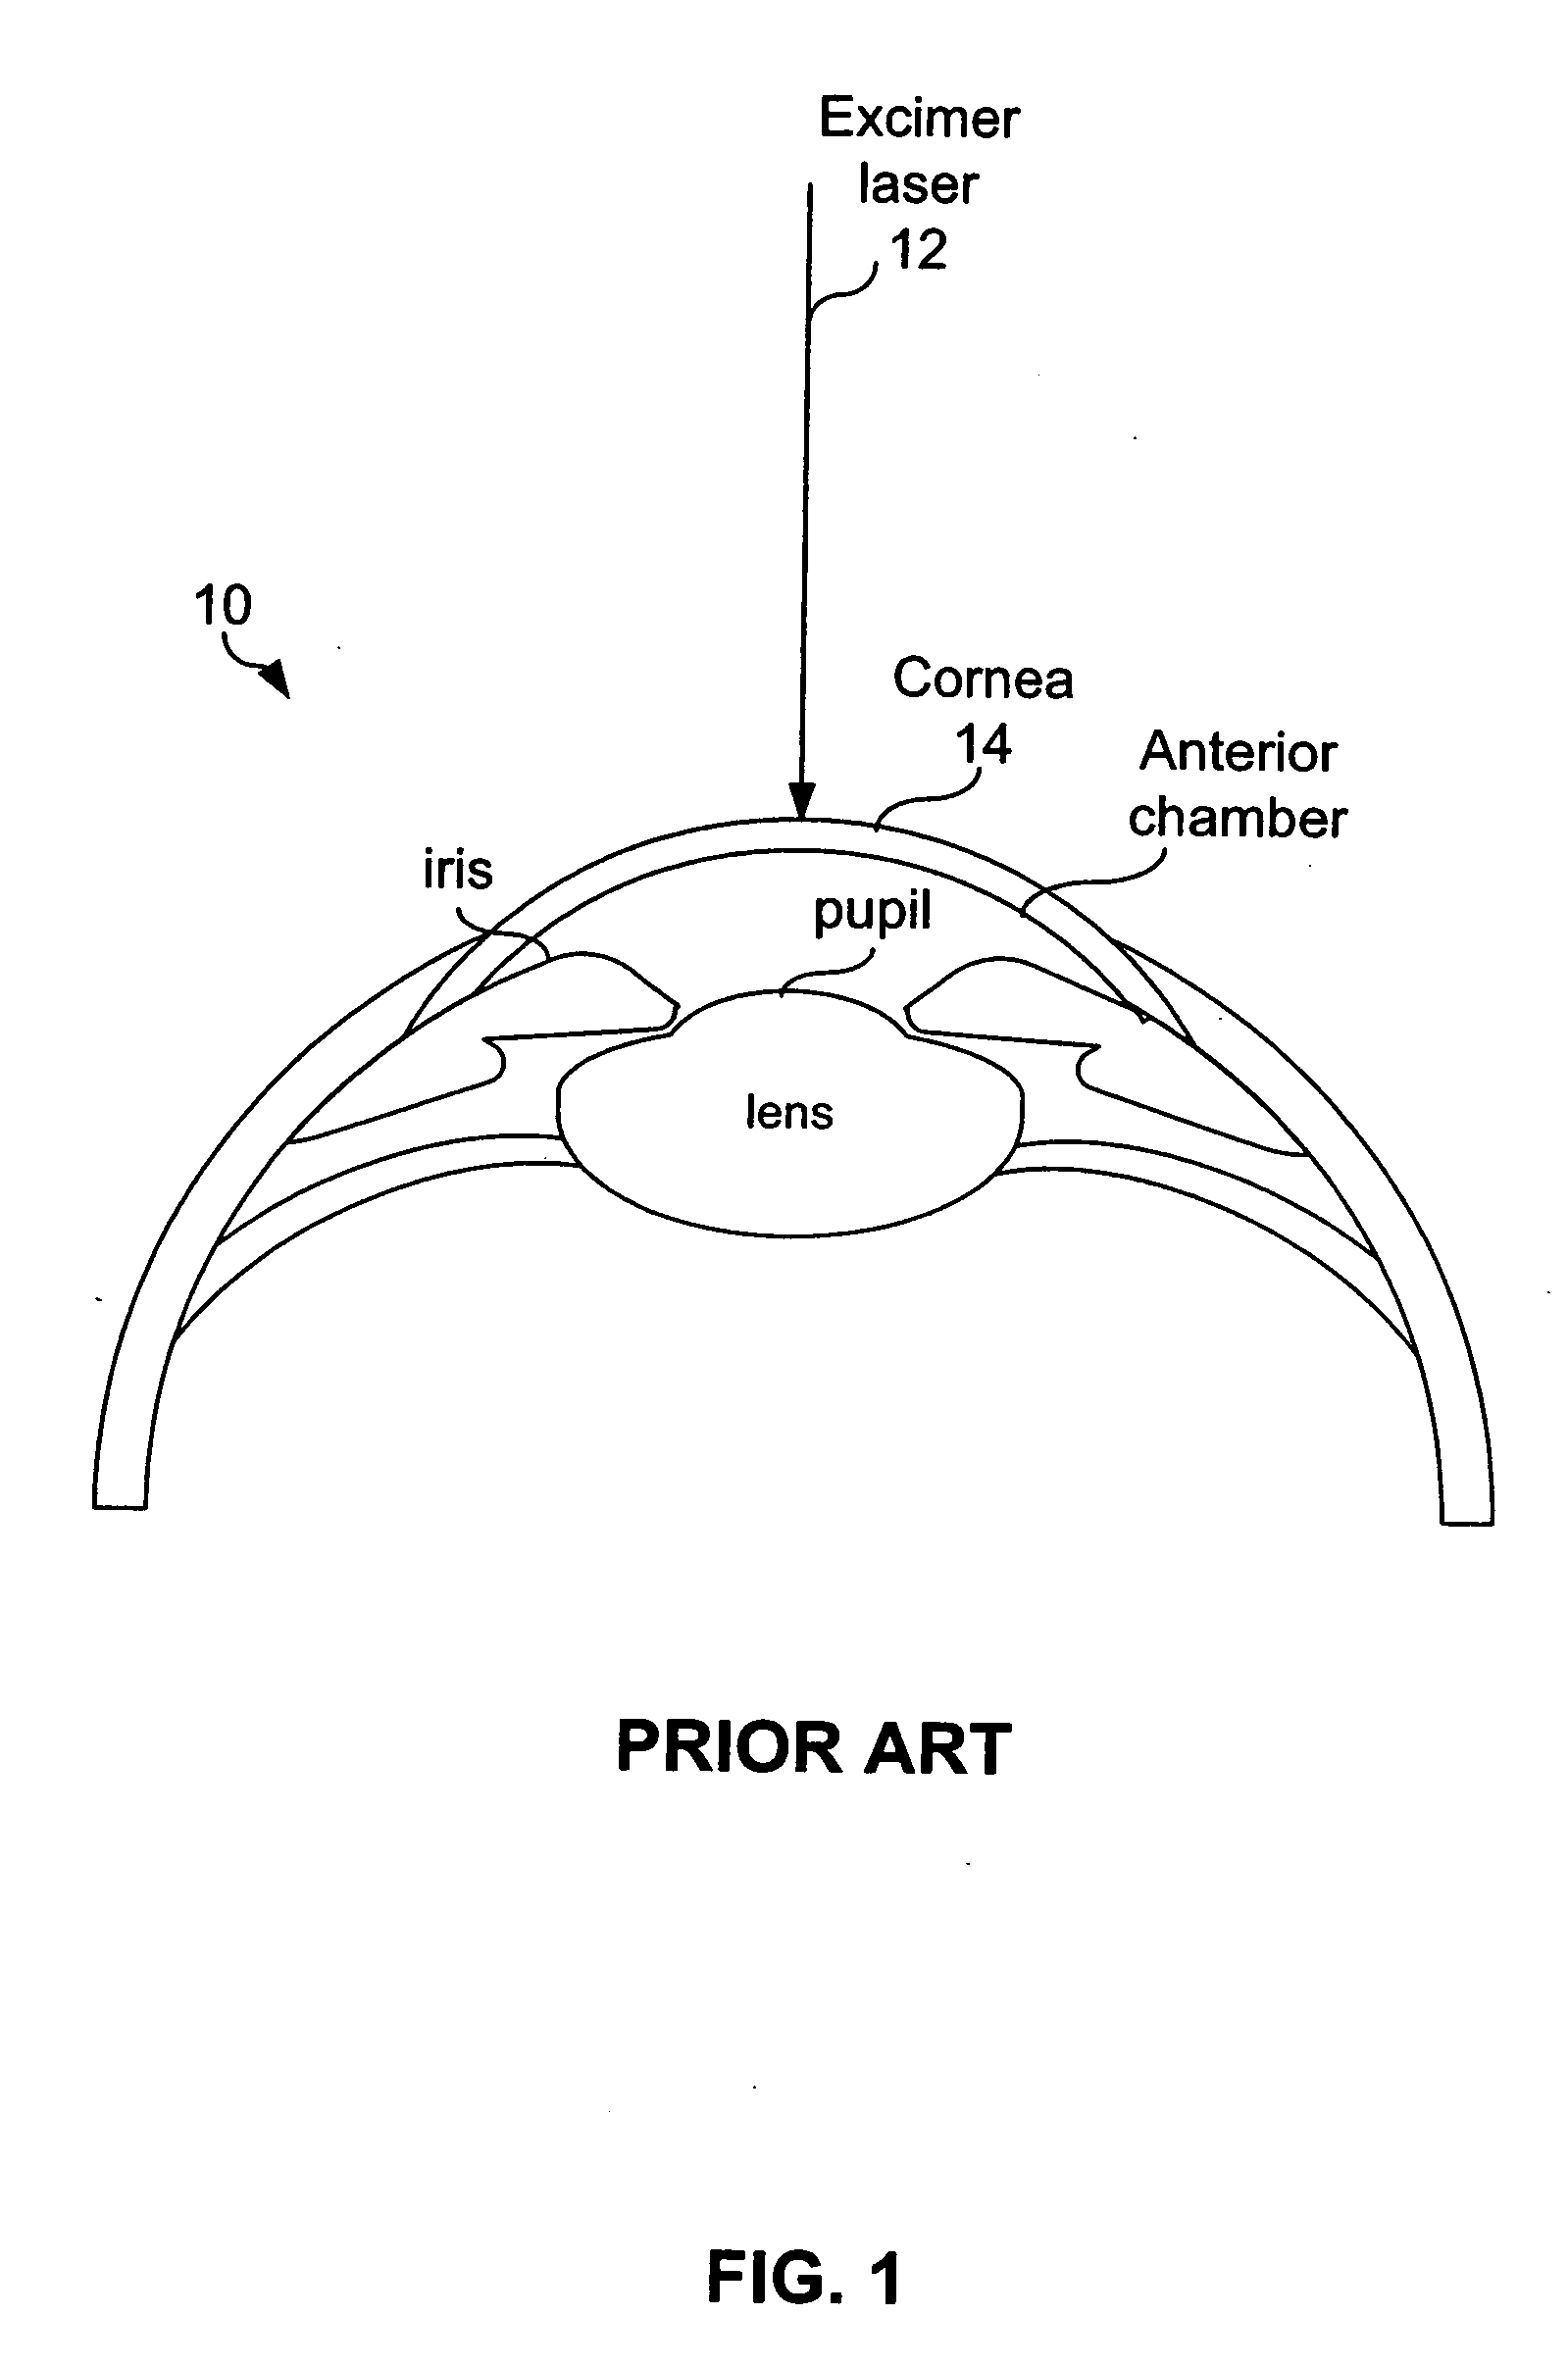 System and method for automatic self-alignment of a surgical laser